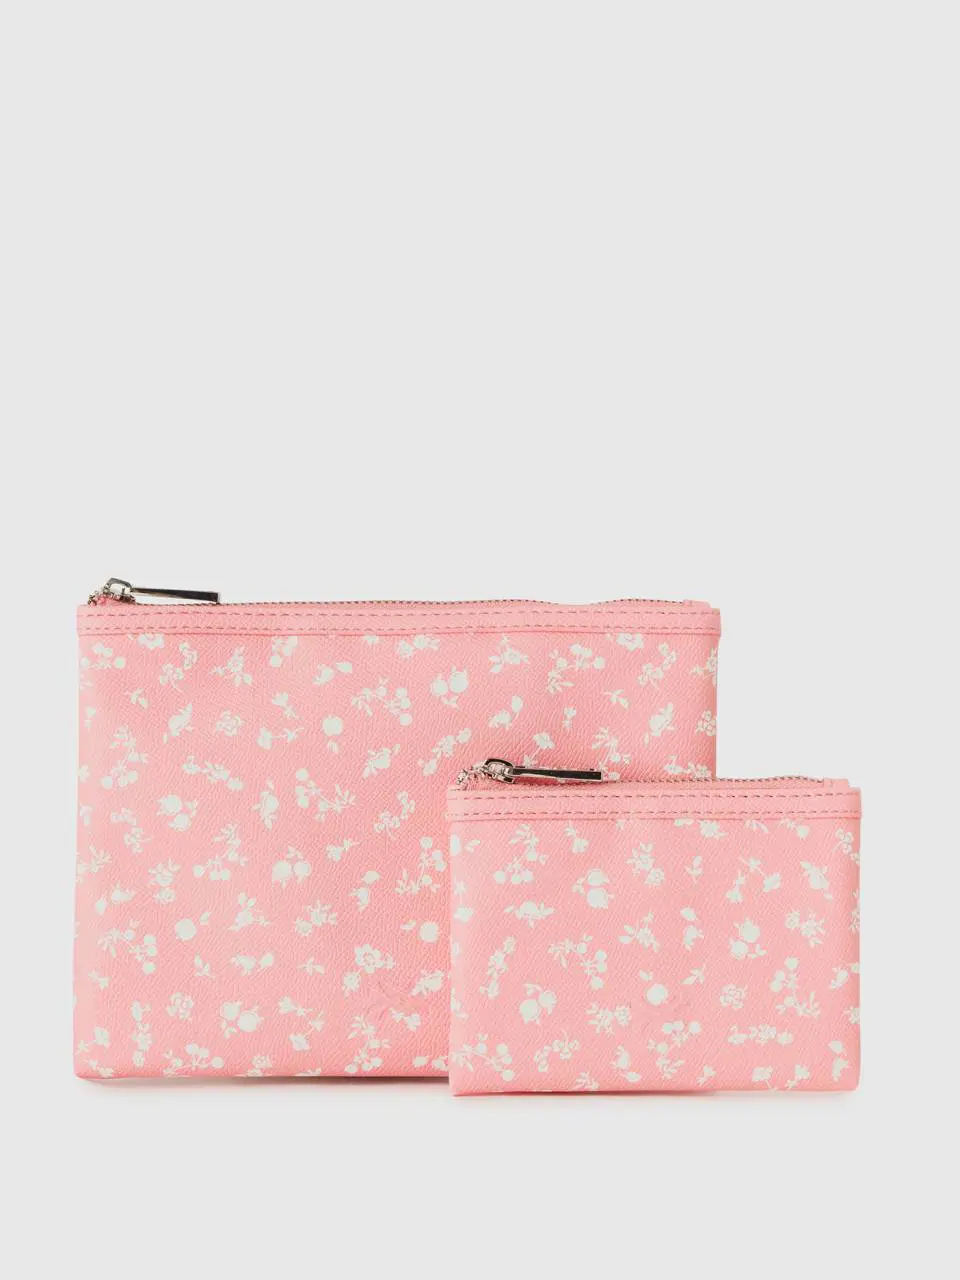 Benetton two pink floral patterned bags. 1